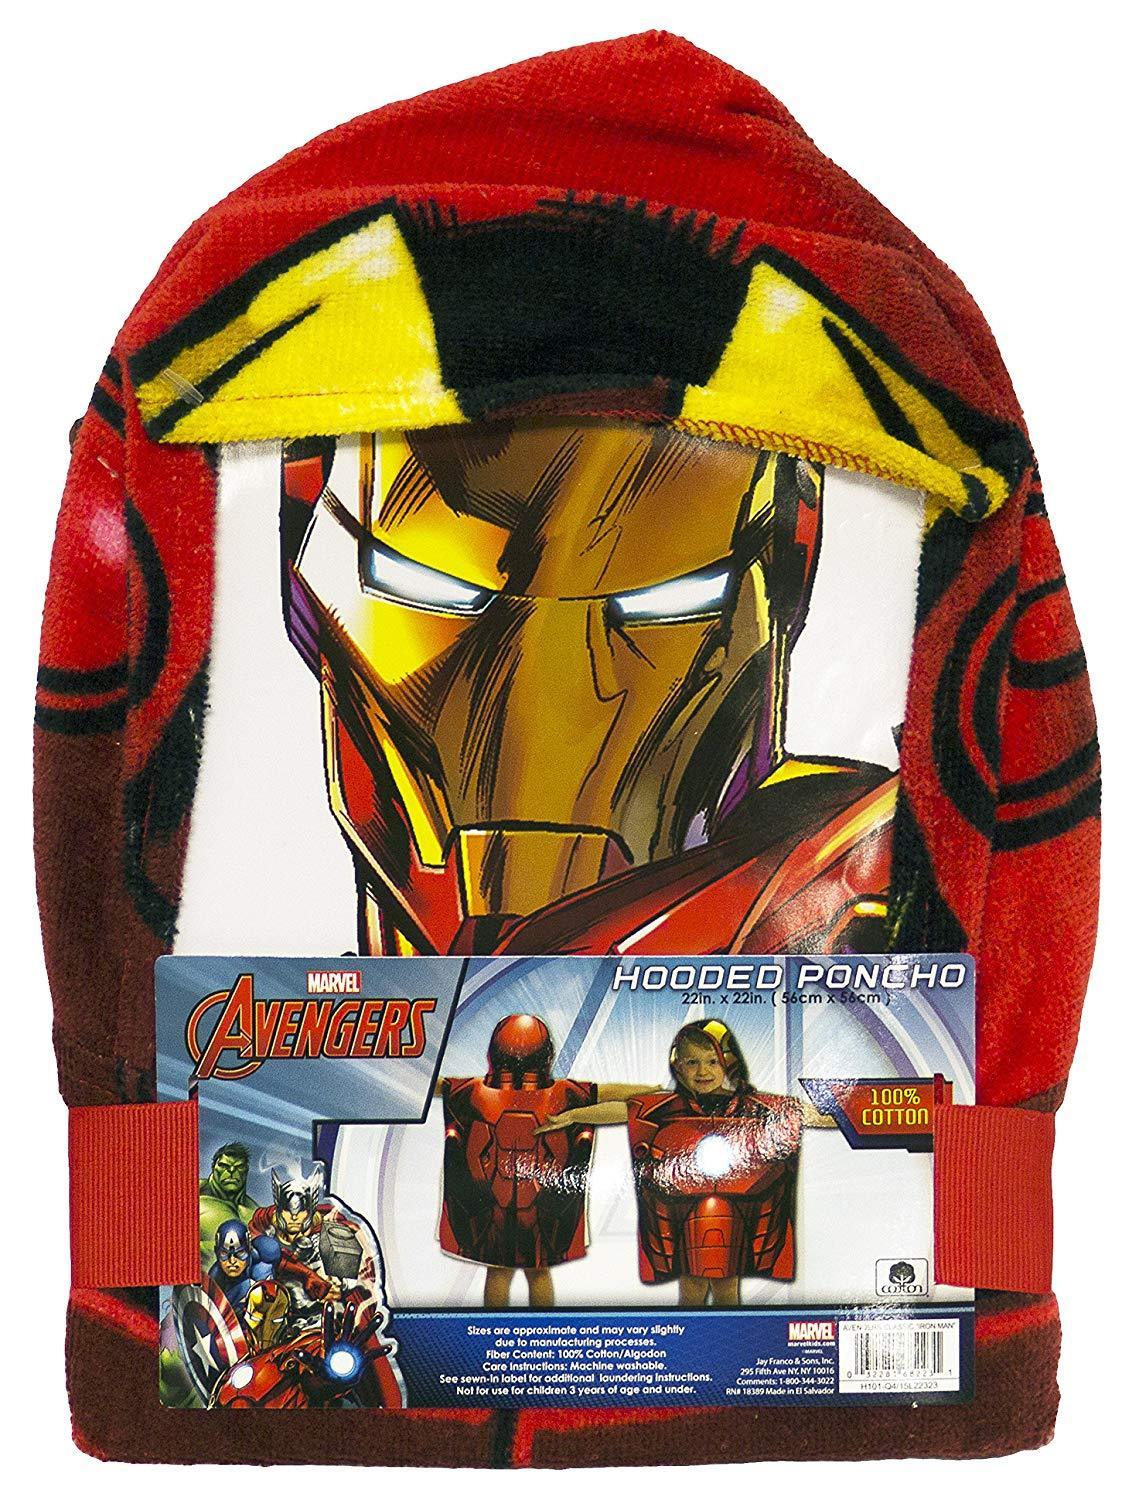 Marvel Avengers Hooded Poncho Beach or Bath Towel - General Wholesale Direct